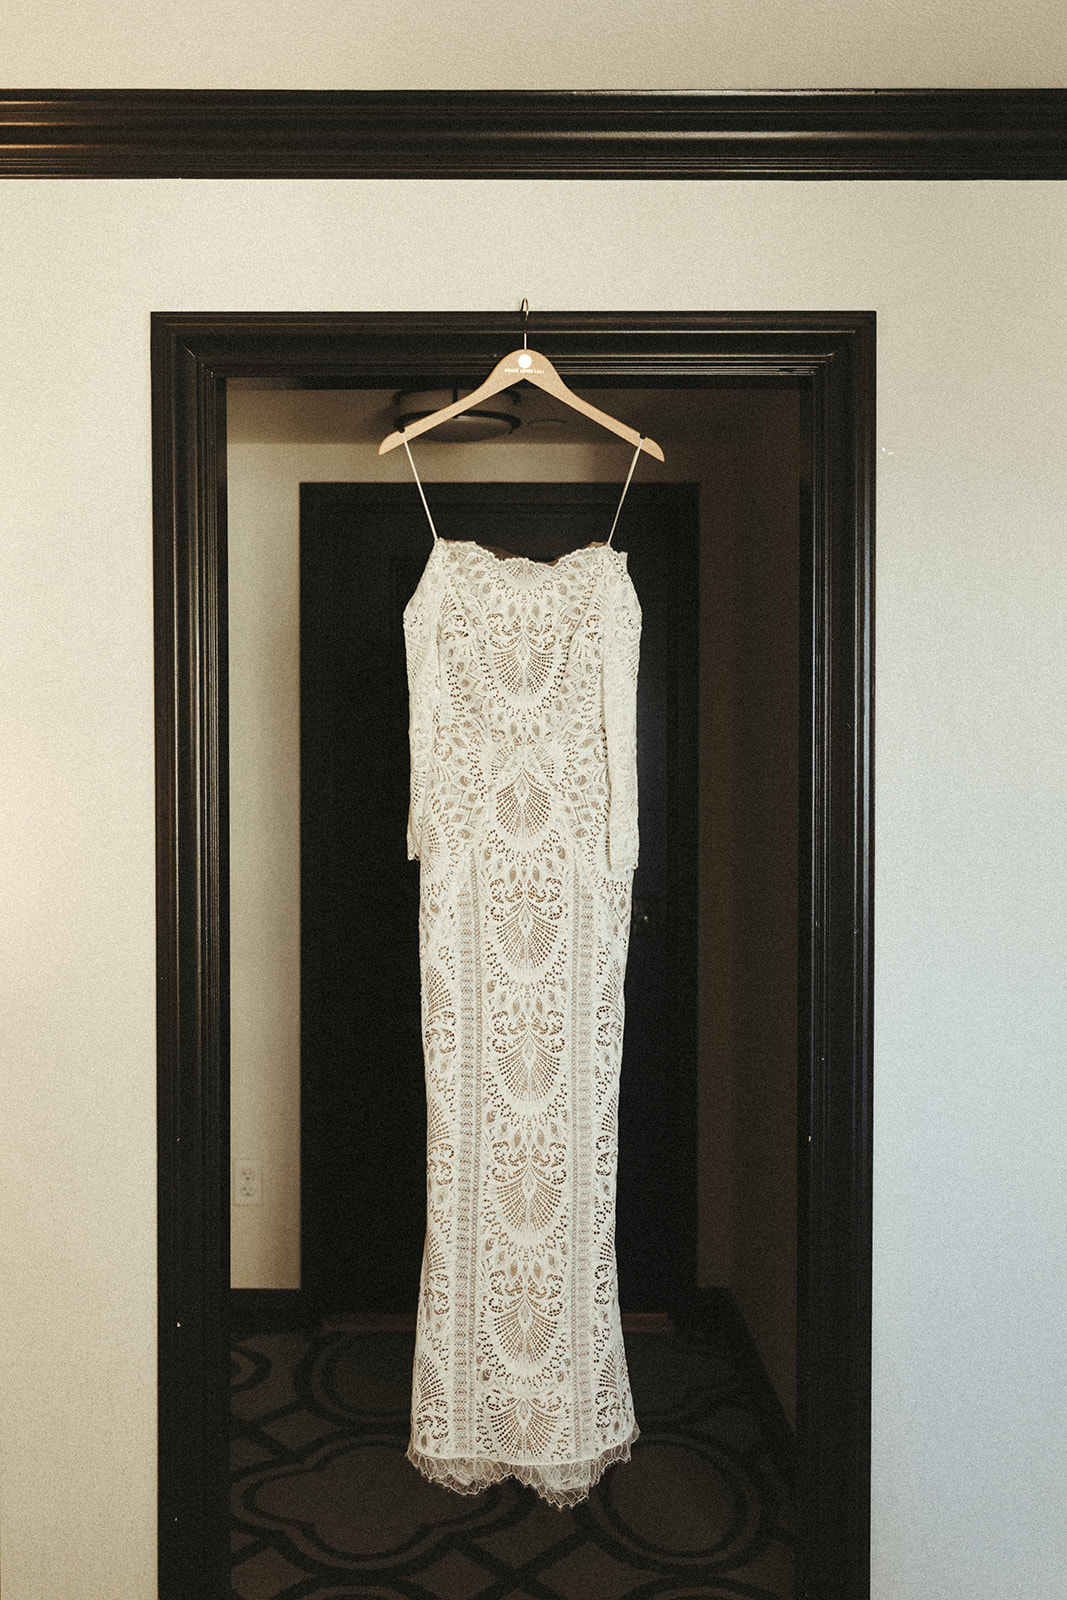 The brides lace silhouette wedding dress hanging in the doorway of the bridal suite 